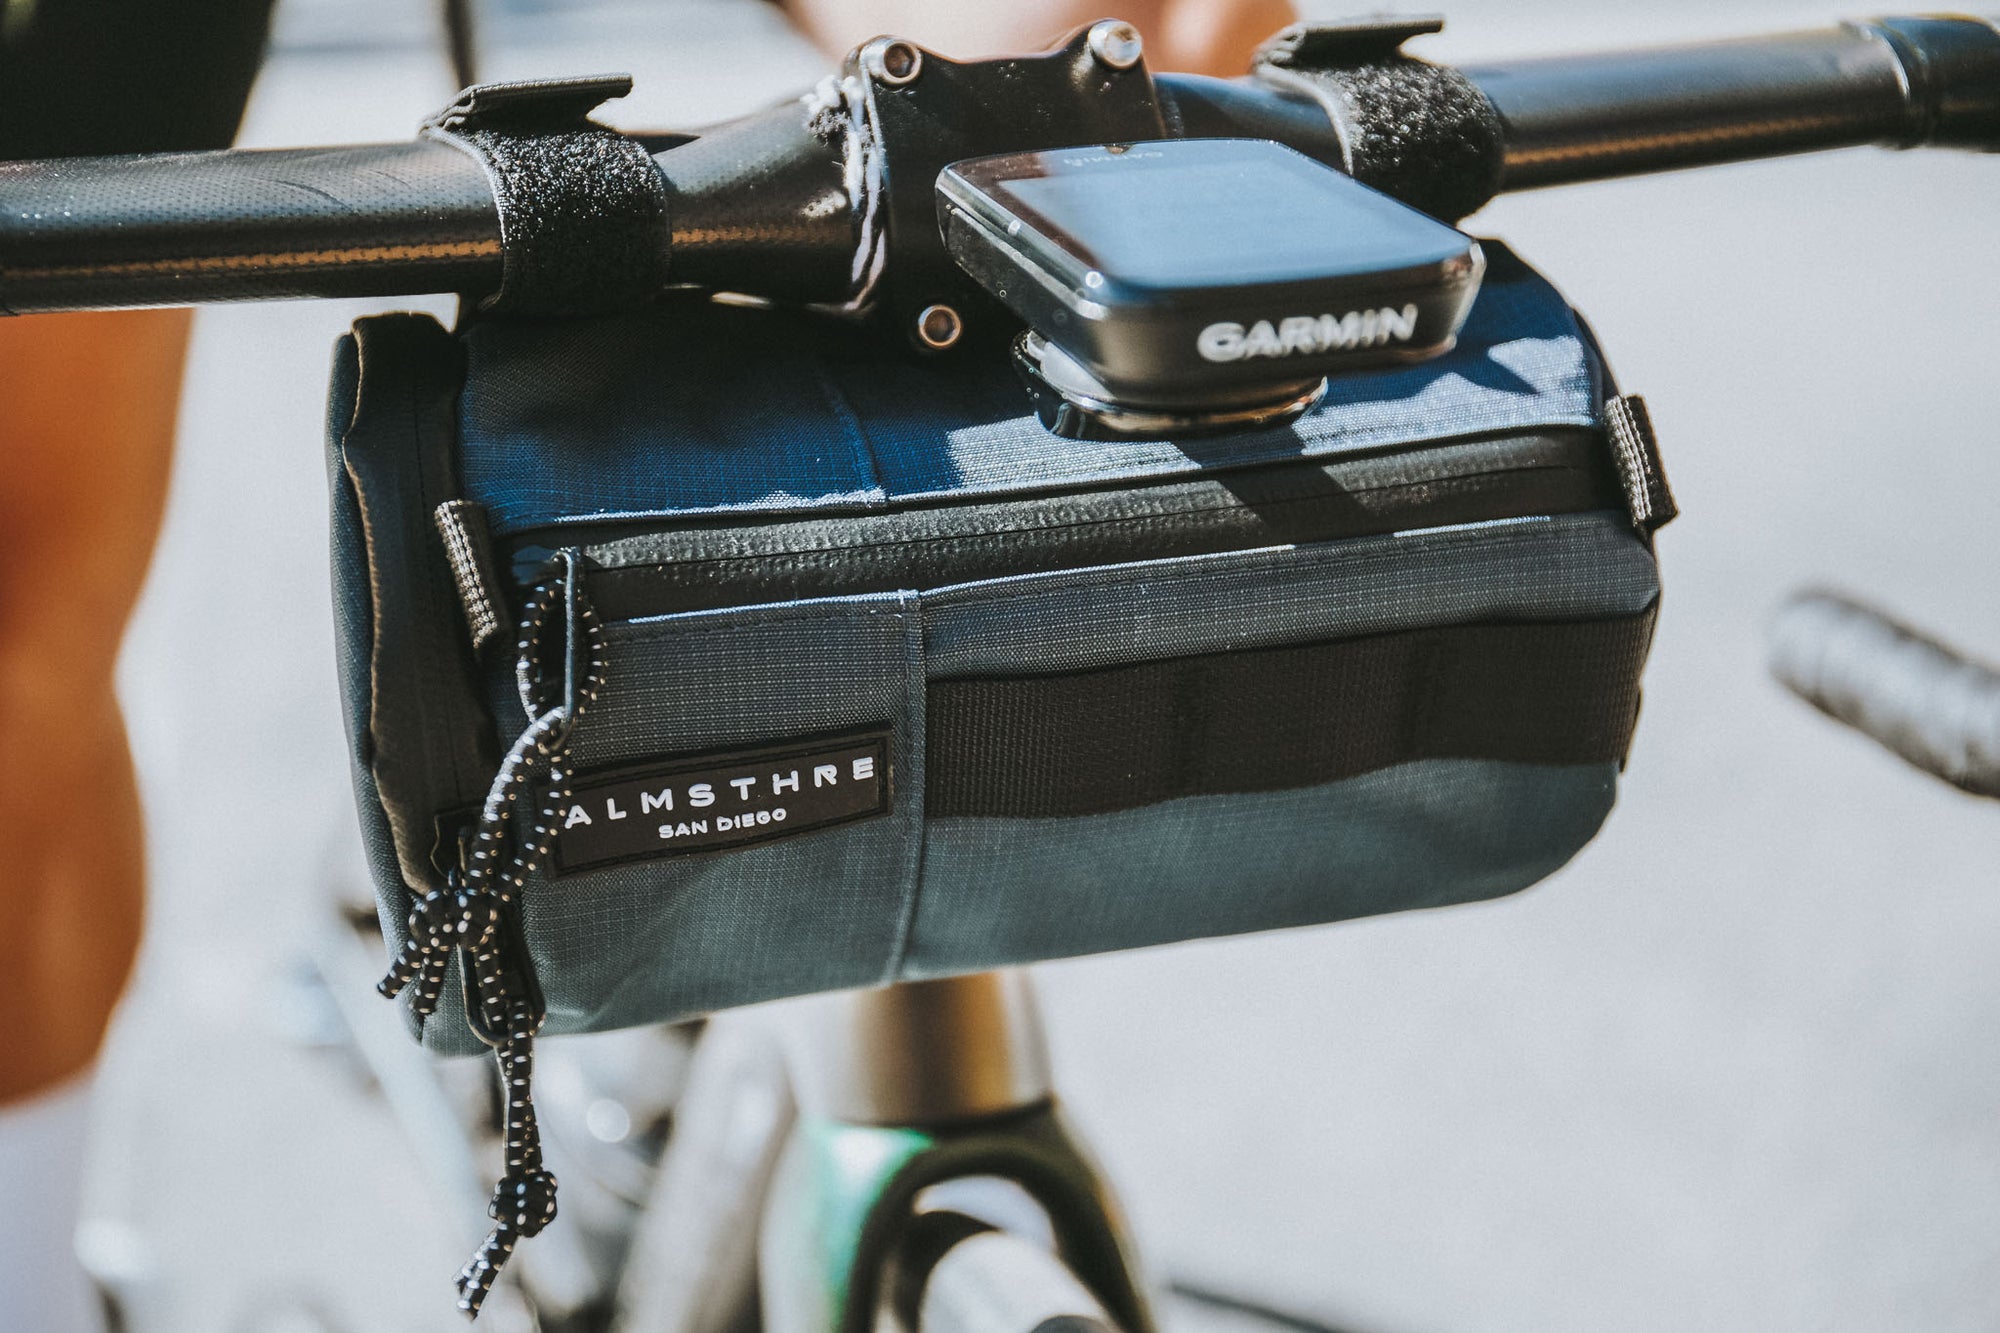 ALMSTHRE full-sized cycling handlebar bag designed for adventure, featuring weatherproof material and waterproof zippers. The Navy Blue bag is securely mounted on the handlebars, ready to accompany cyclists on their outdoor pursuits.